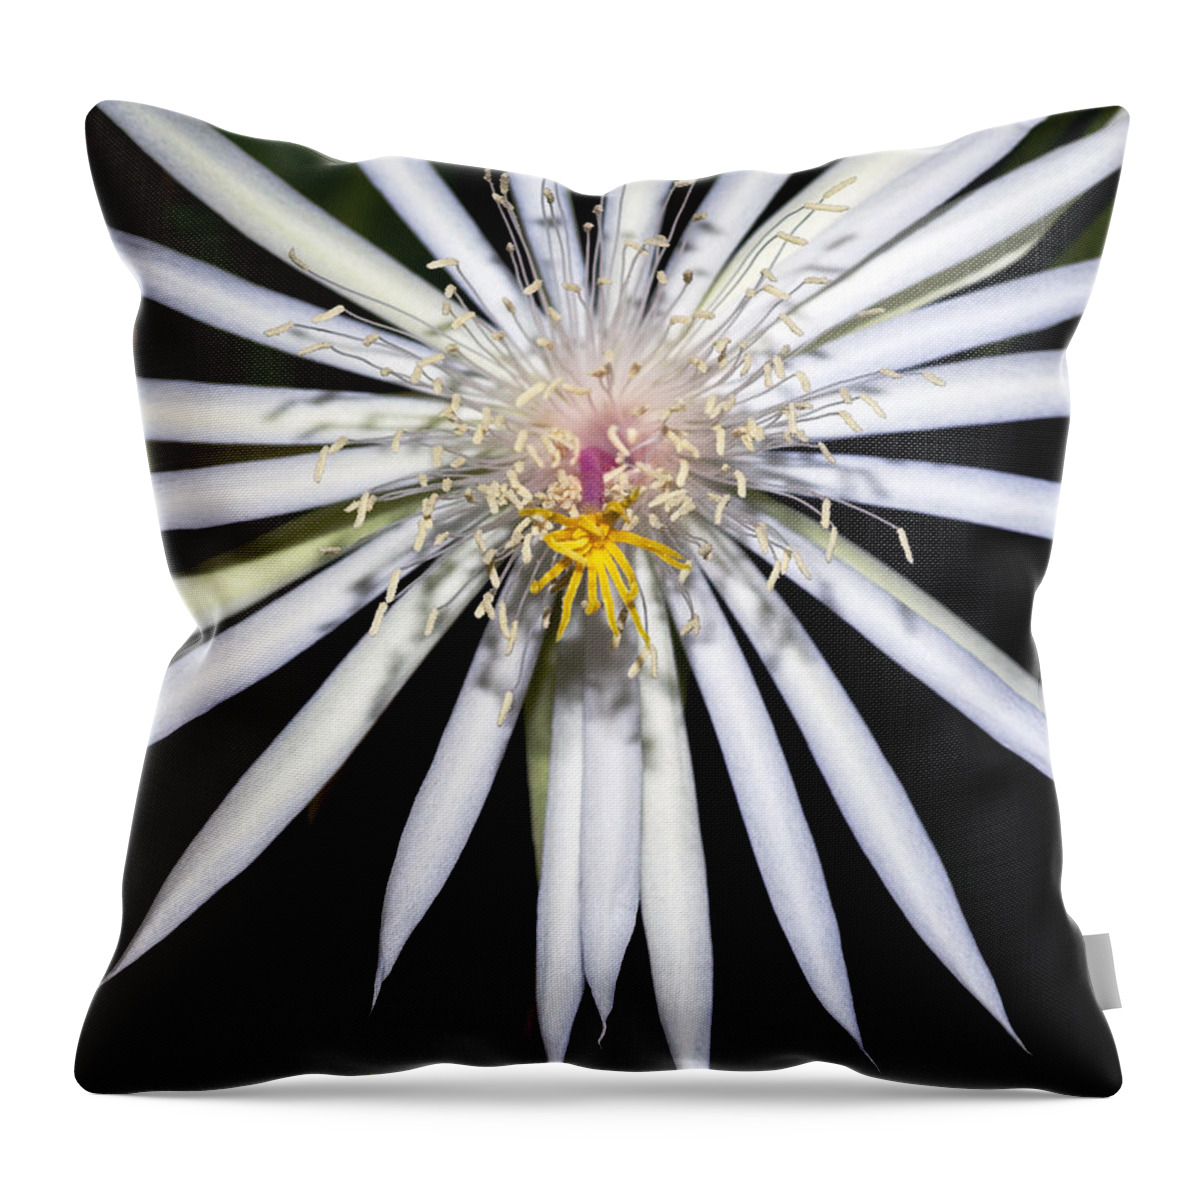 Cactus Flower Throw Pillow featuring the photograph Bold Cactus Flower by Kelley King